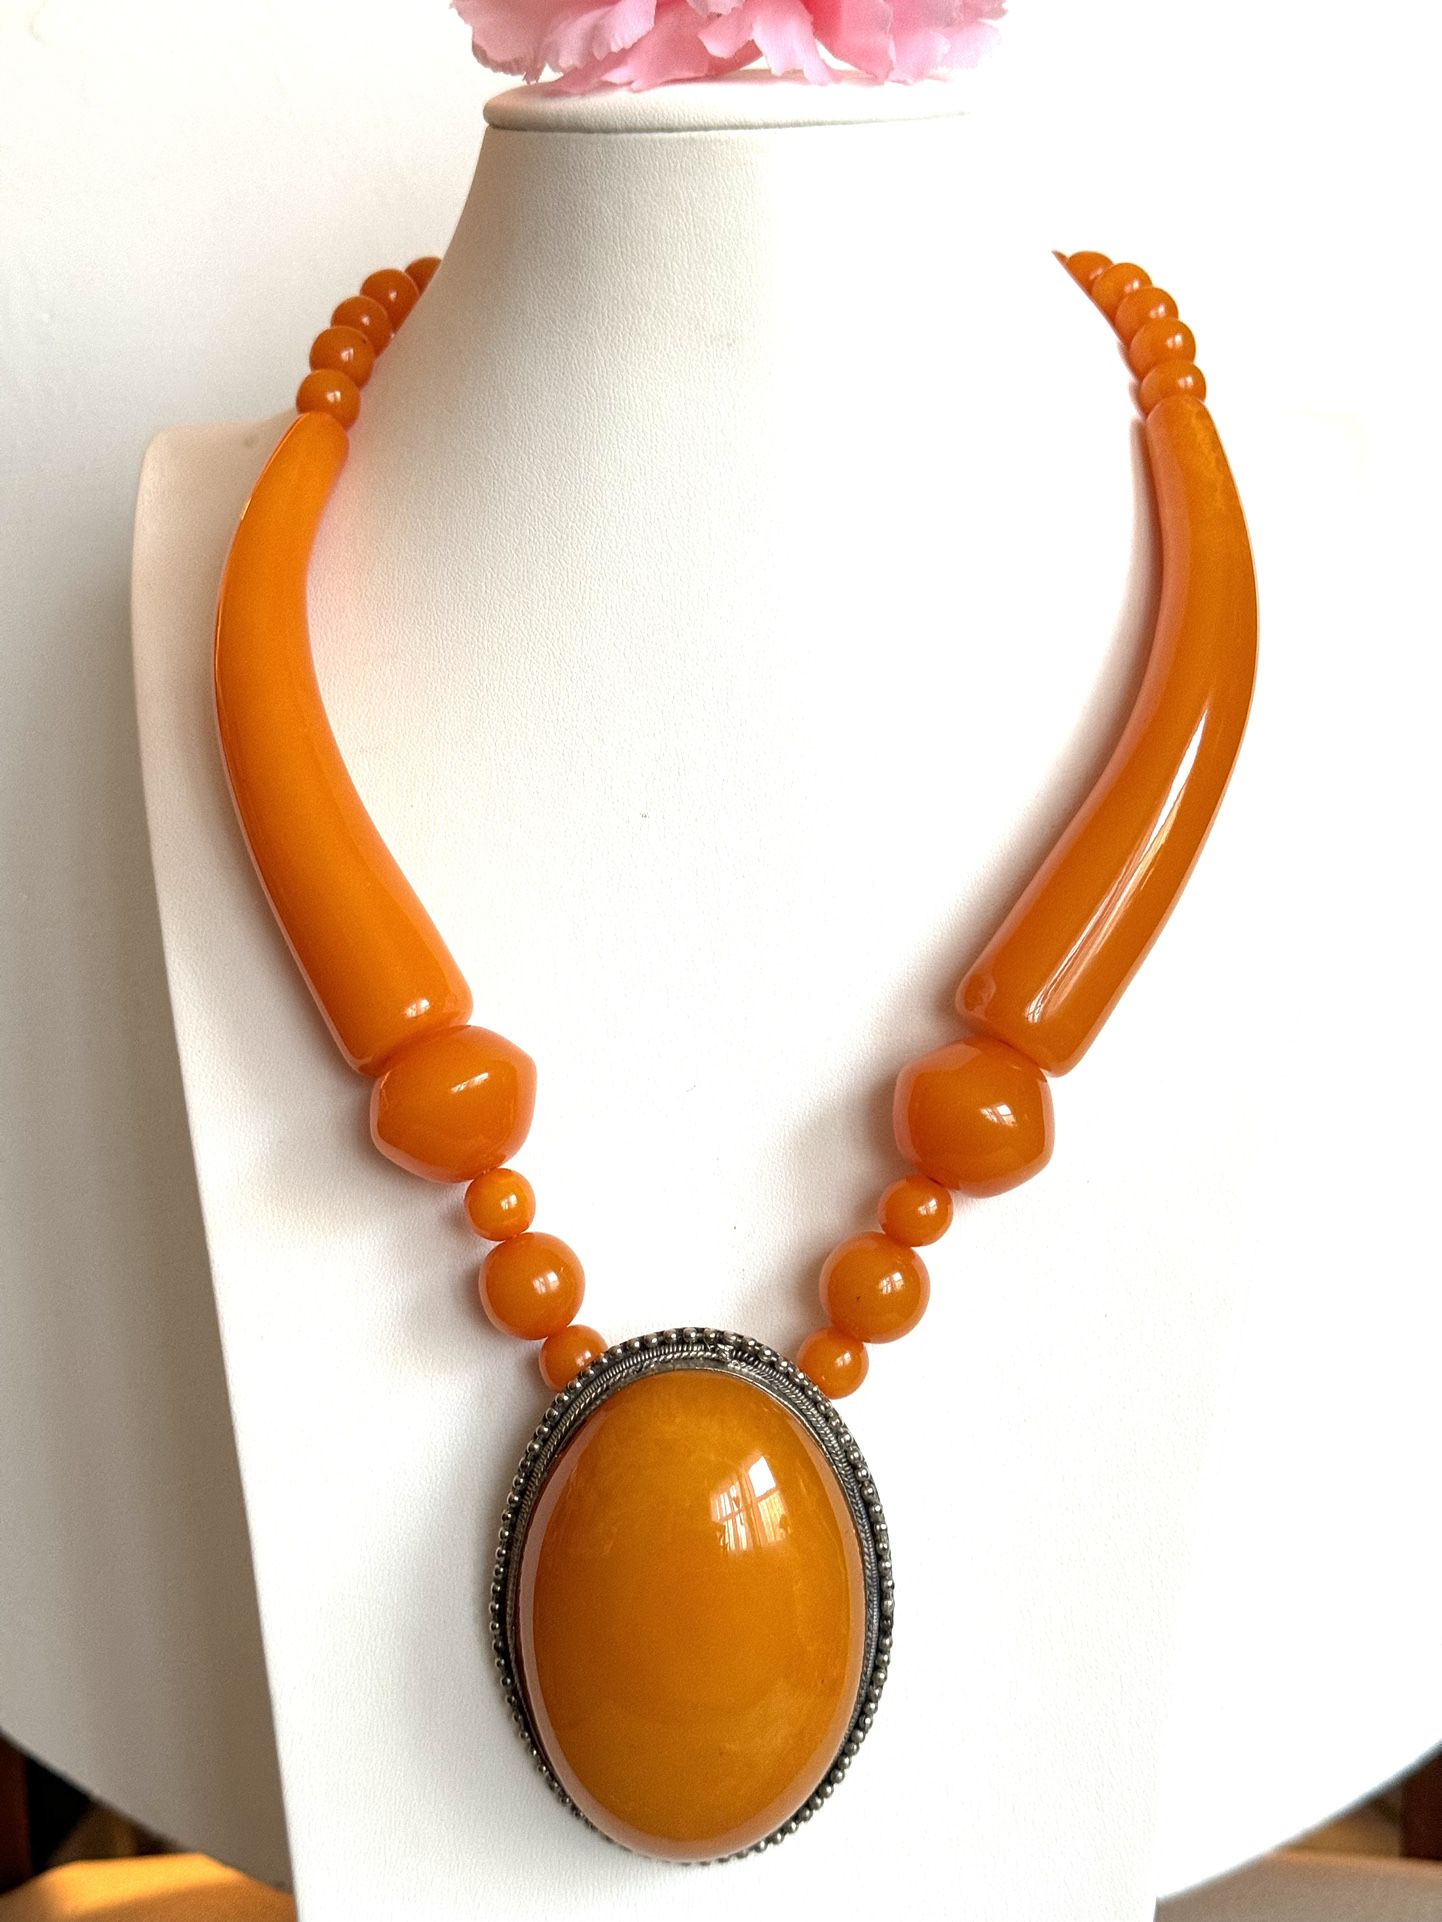 Vintage style unique design Amber resin handmade necklace 22”inch long